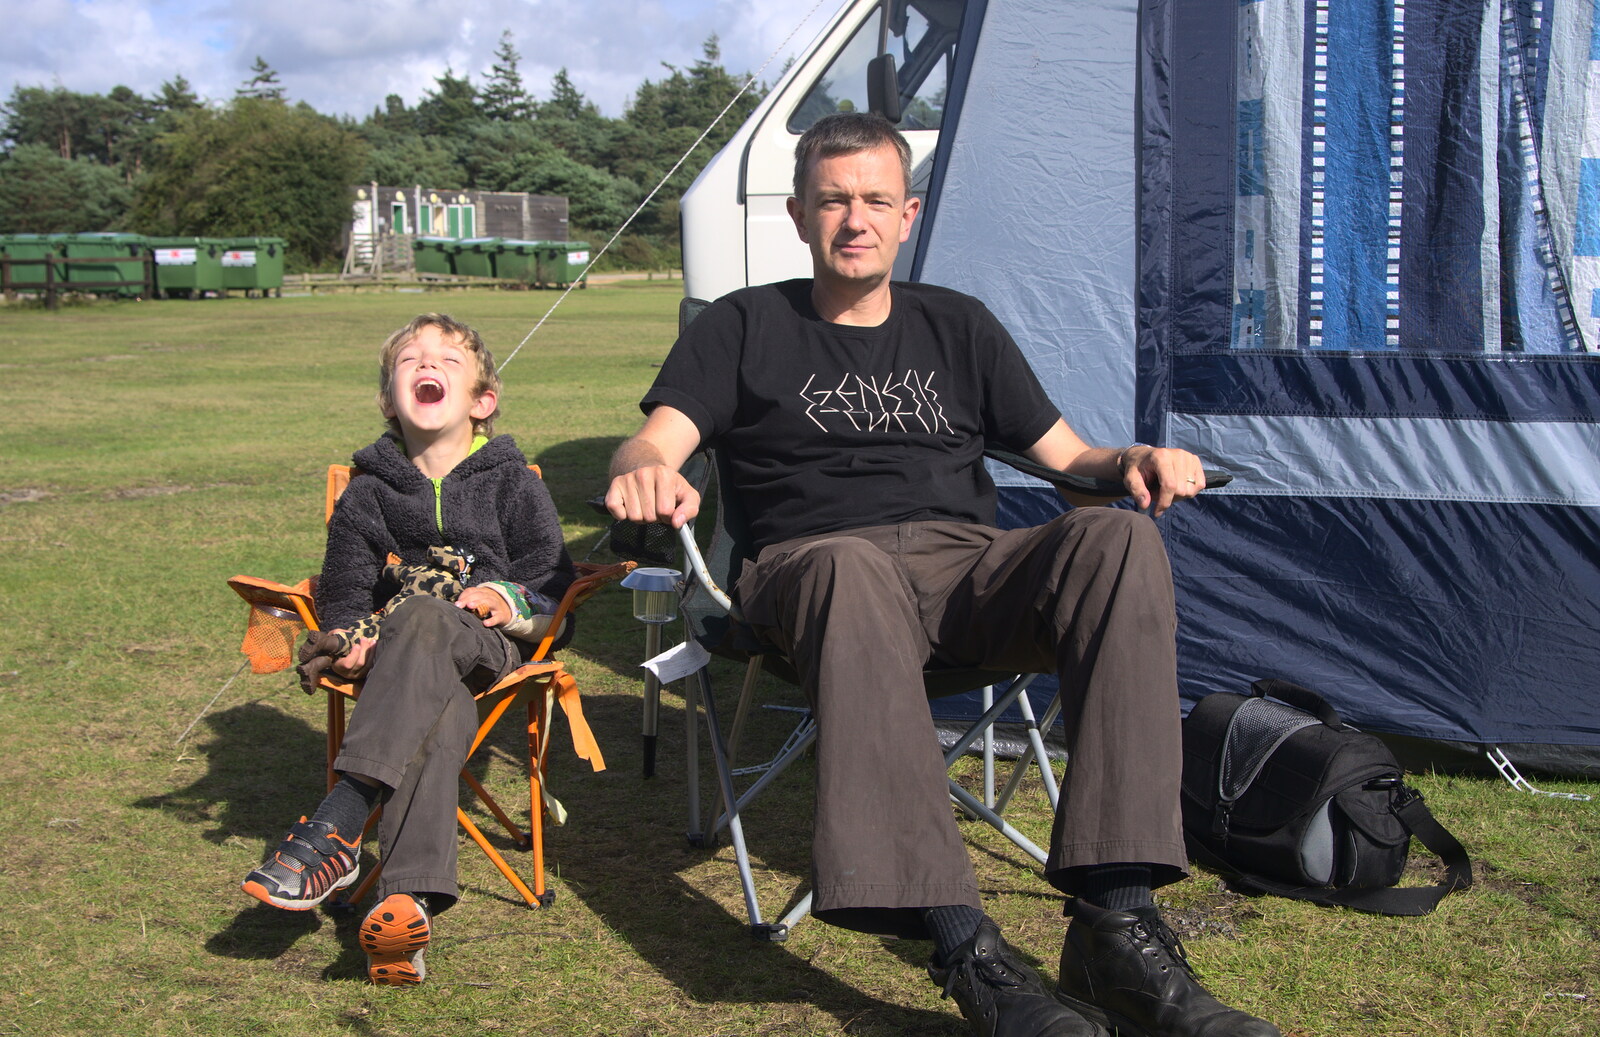 Fred has a laff as Nosher looks grumpy from Camping at Roundhills, Brockenhurst, New Forest, Hampshire - 29th August 2015